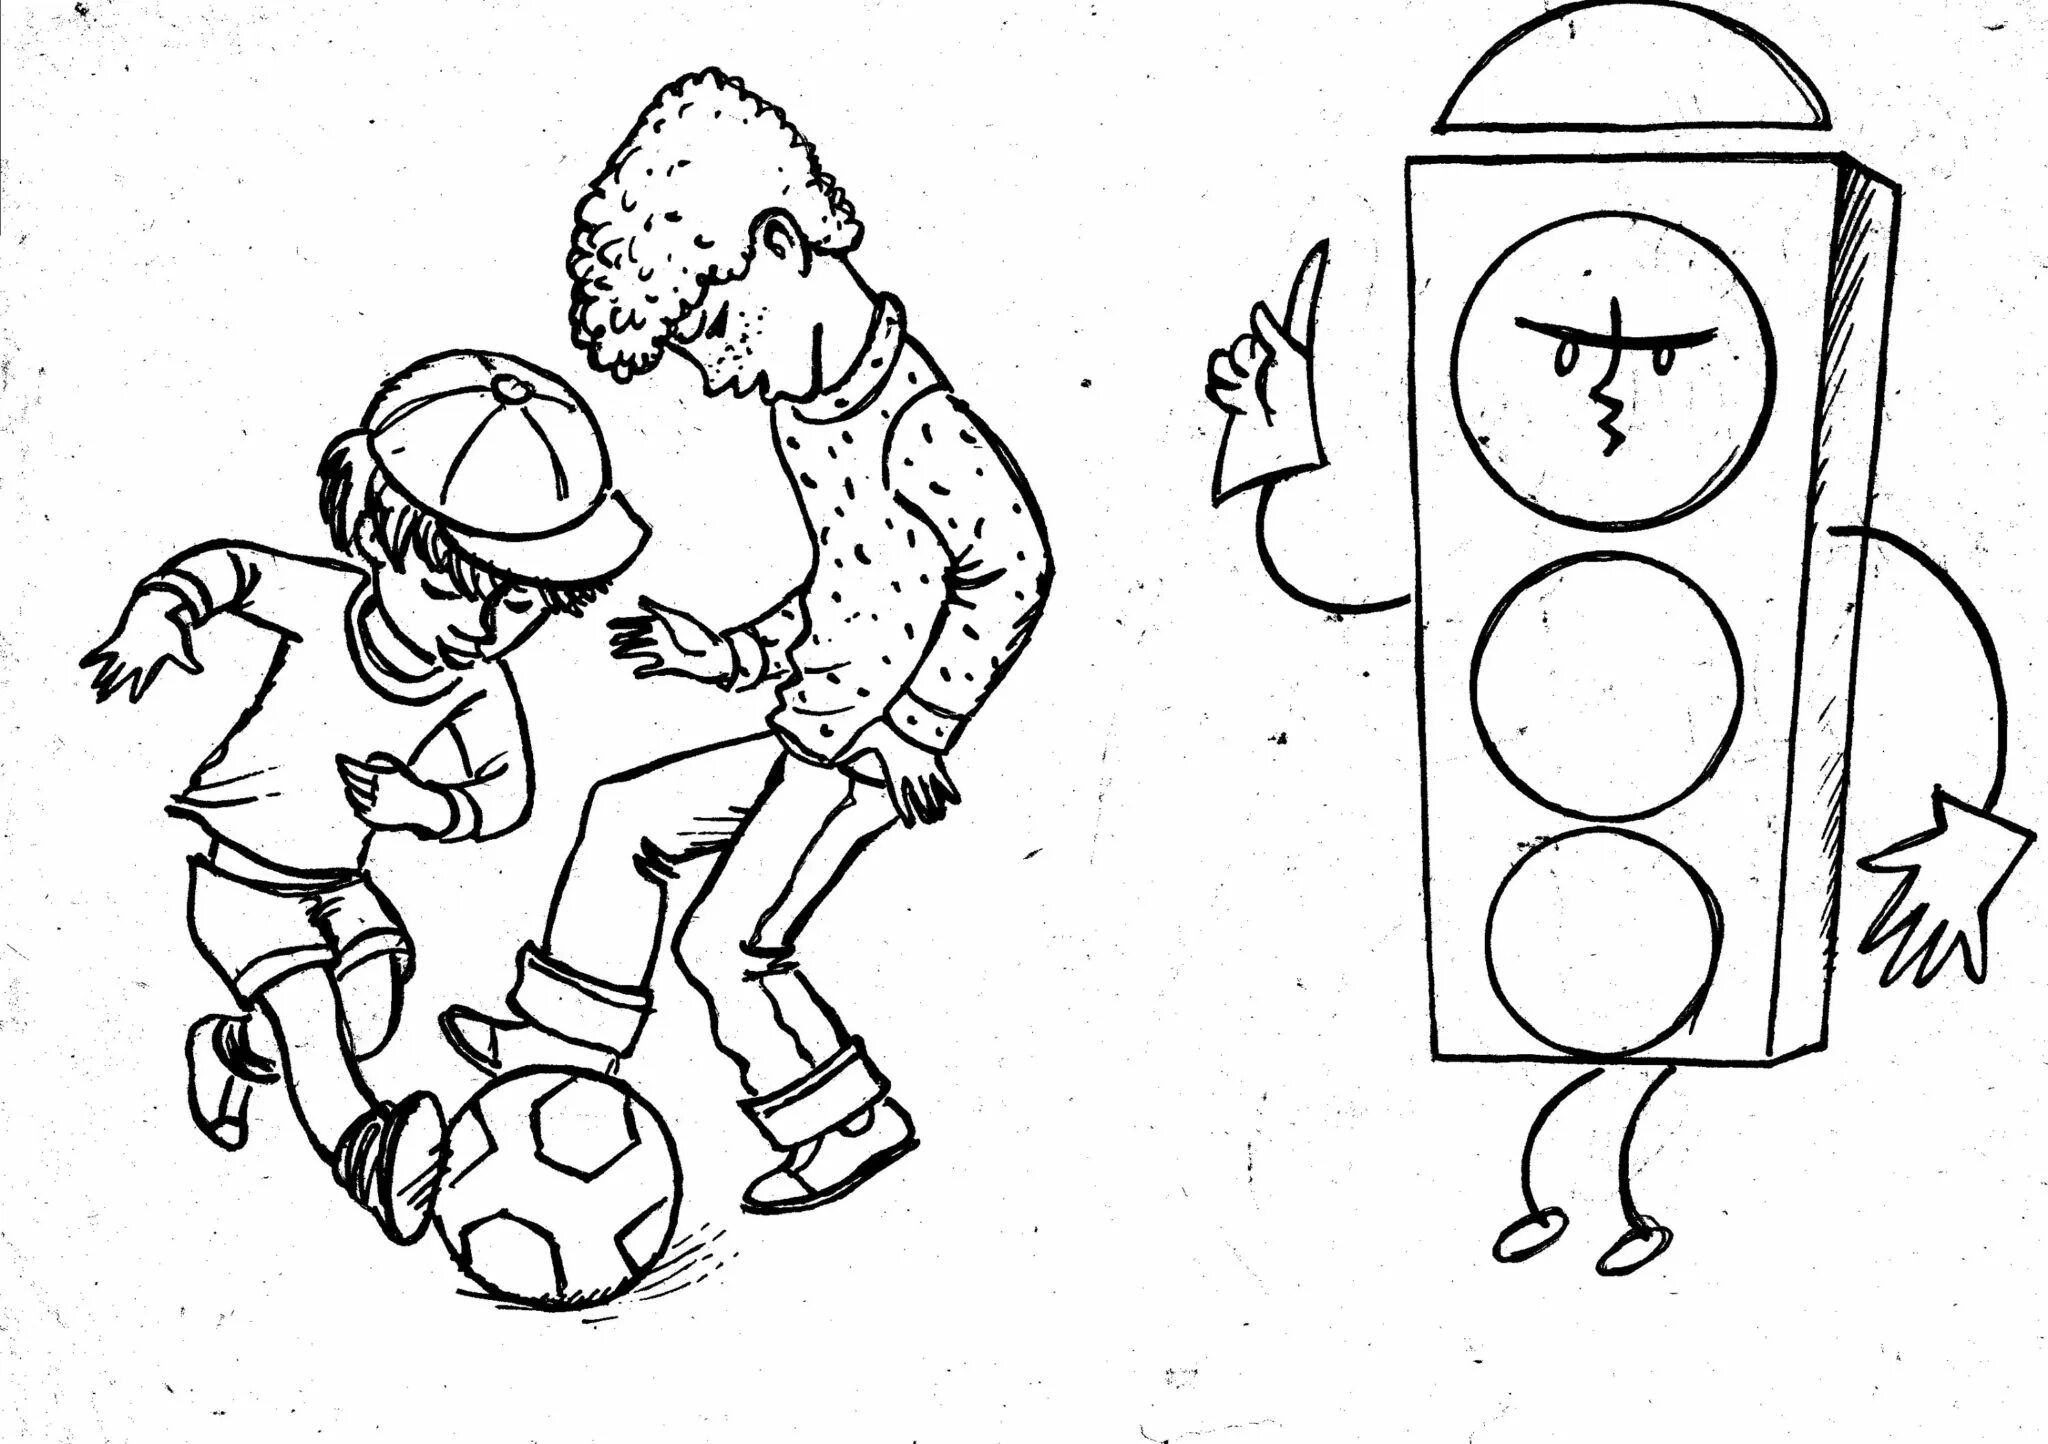 Animated safety coloring page for toddlers